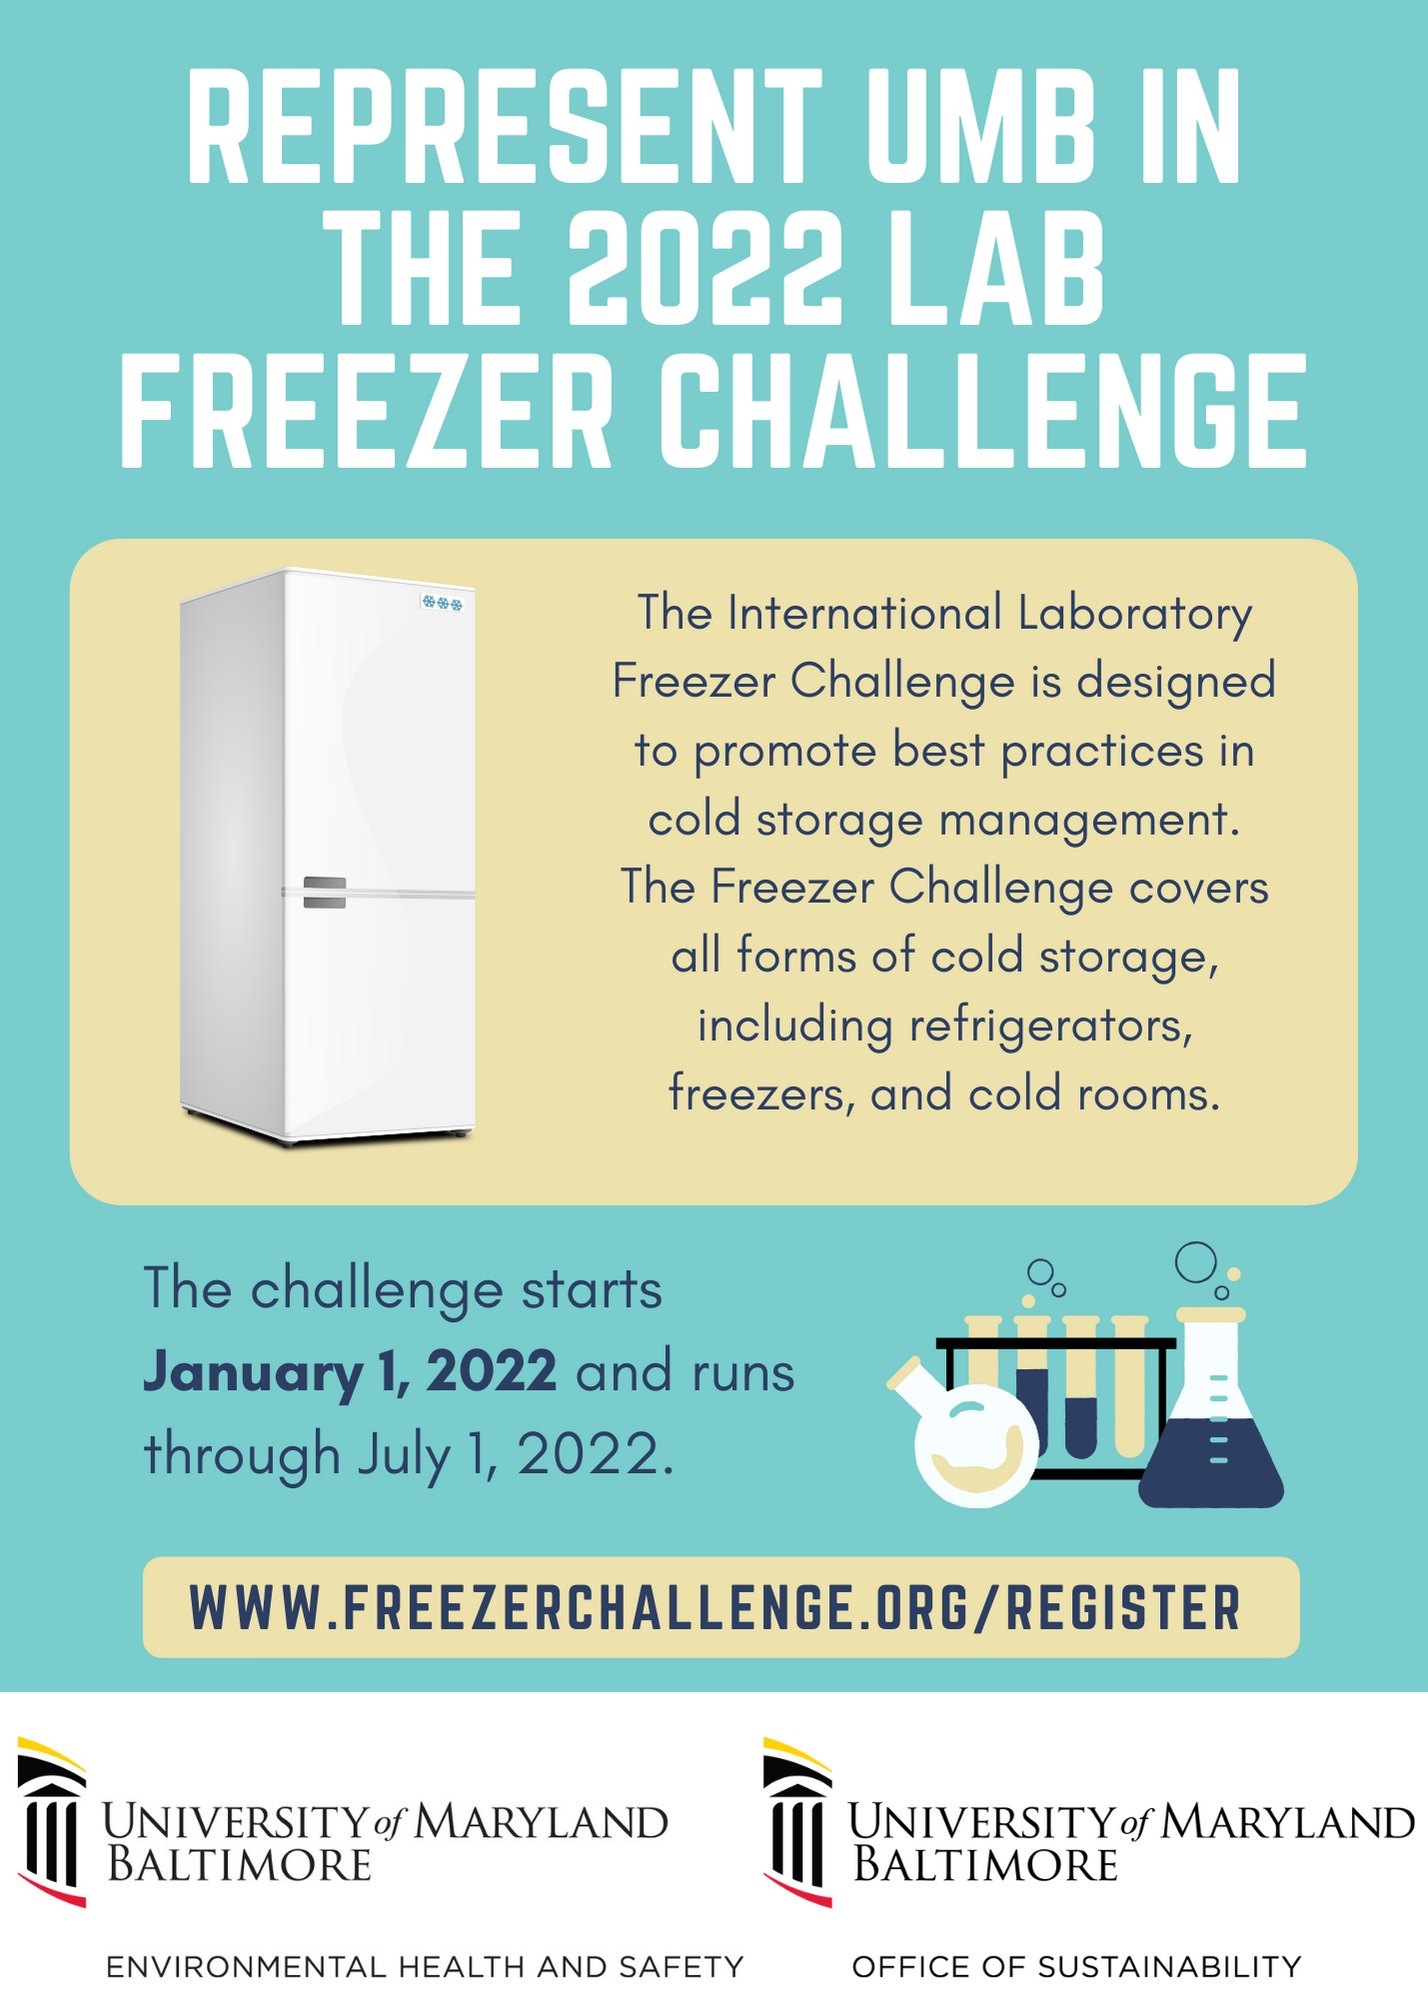 Freezer and lab equipment with text that says 